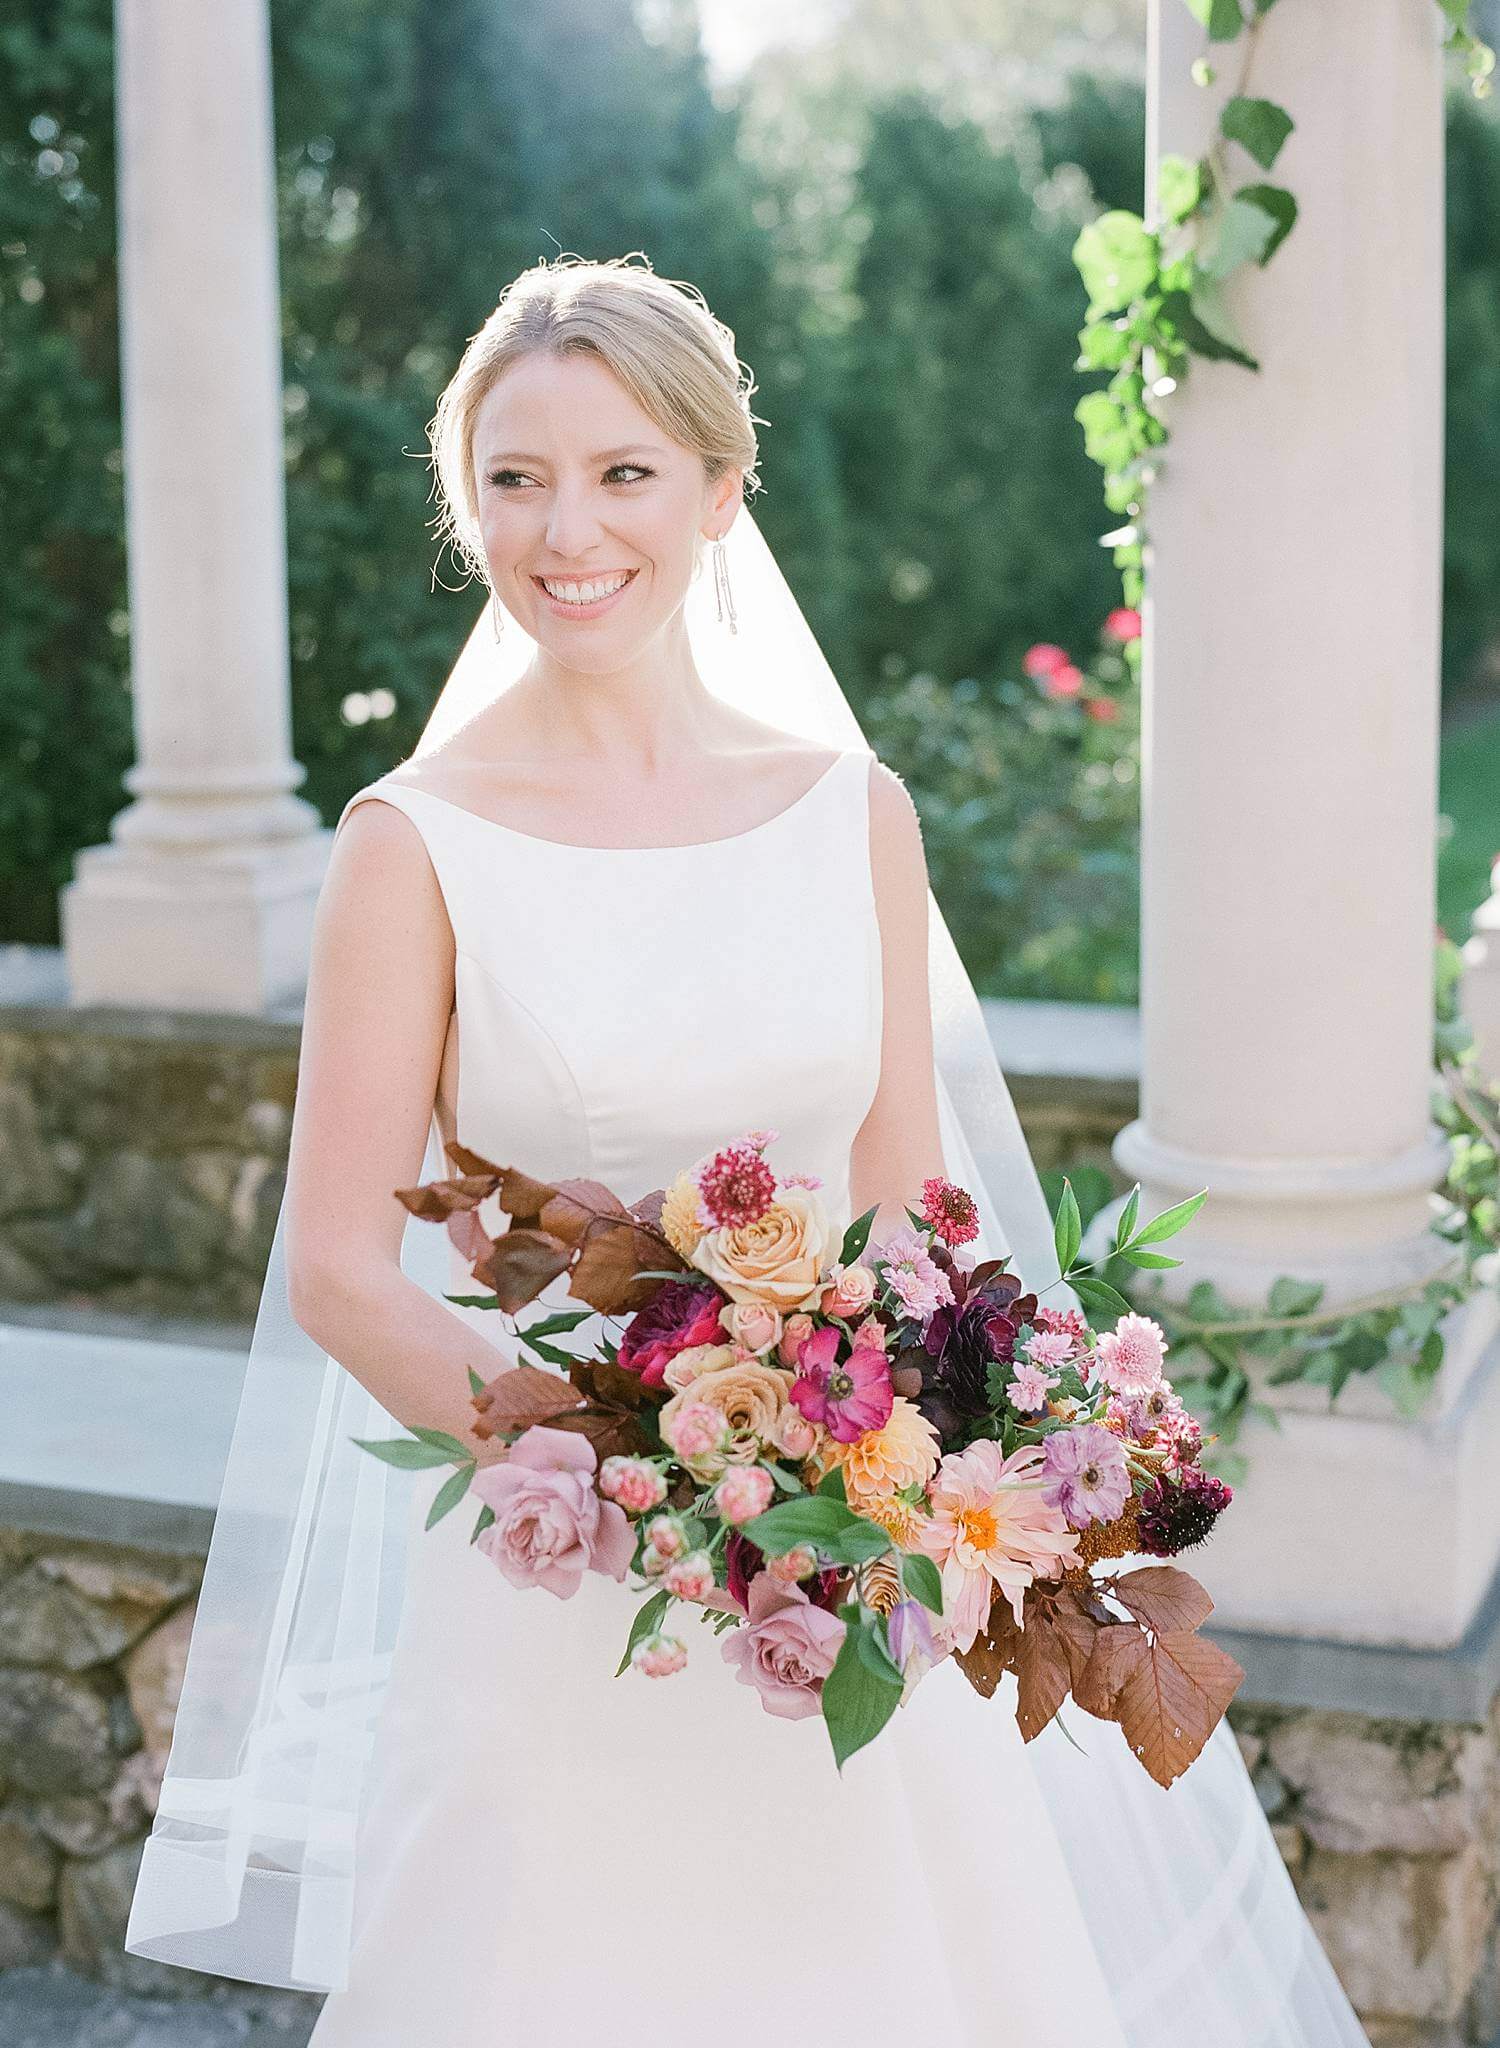 Image of bride holding her bouquet.